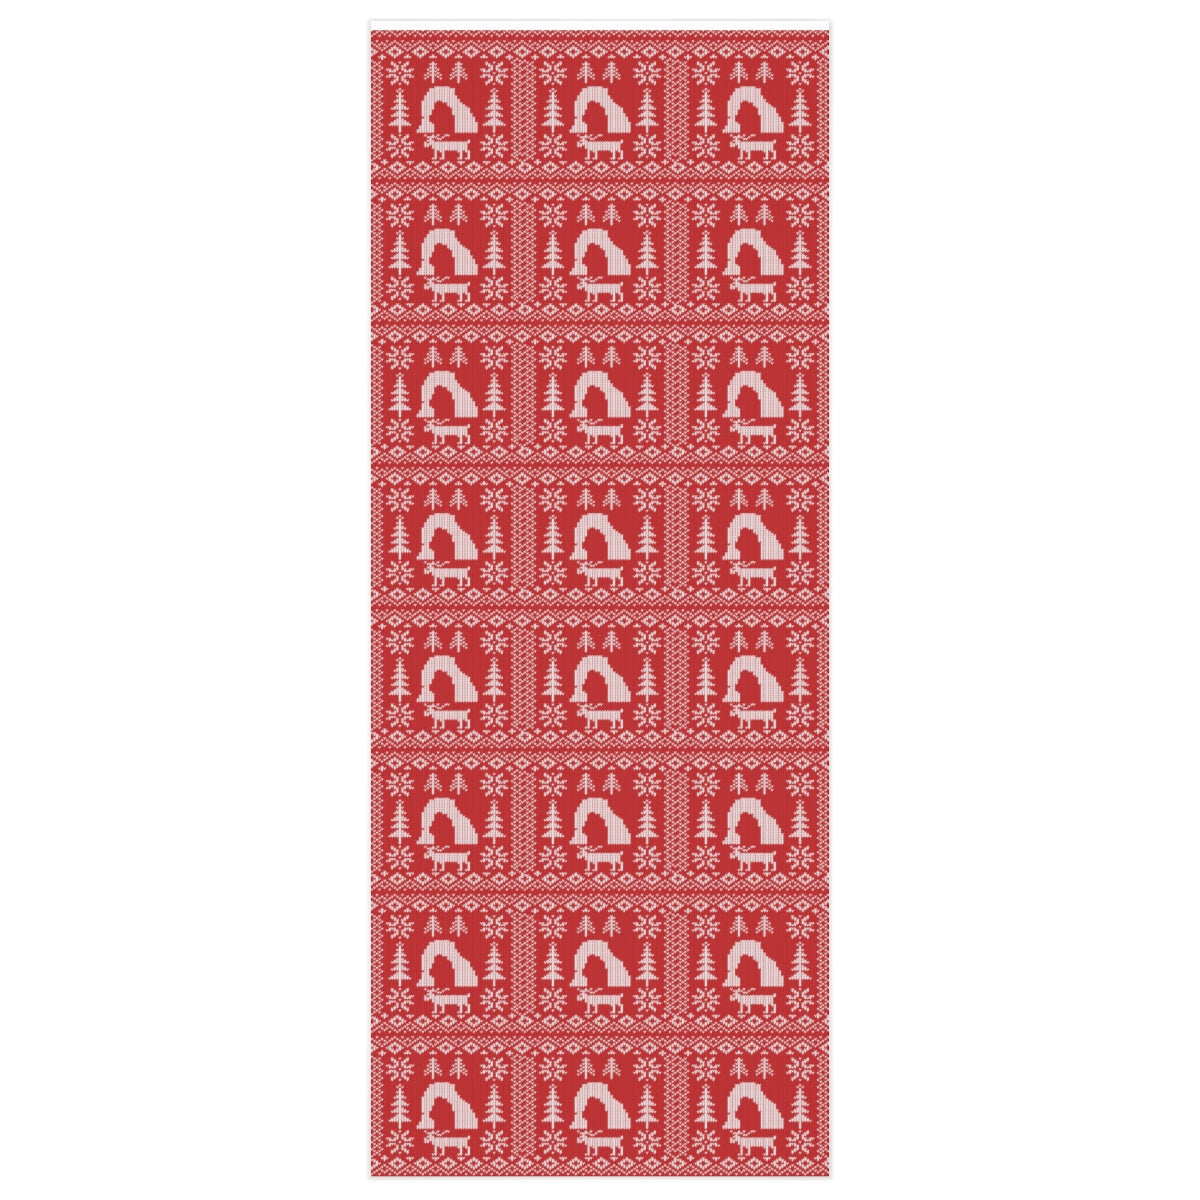 Arches National Park Wrapping Paper - Delicate Arch Fair Isle Design